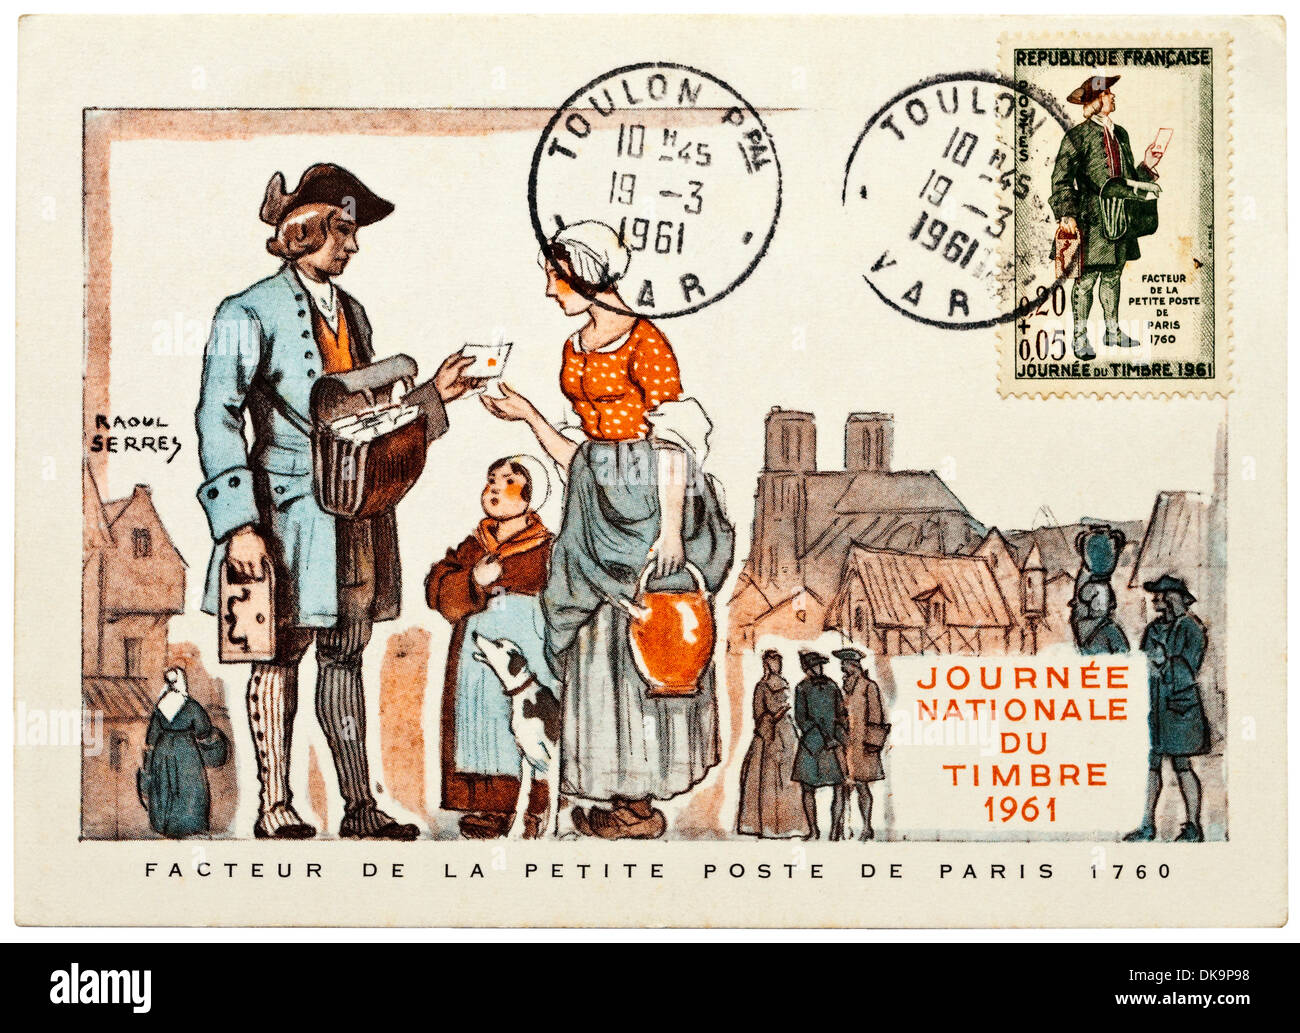 1961 French postcard depicting mailman in Paris 1760 - 'Journée du Timbre' (Stamp Day). Stock Photo